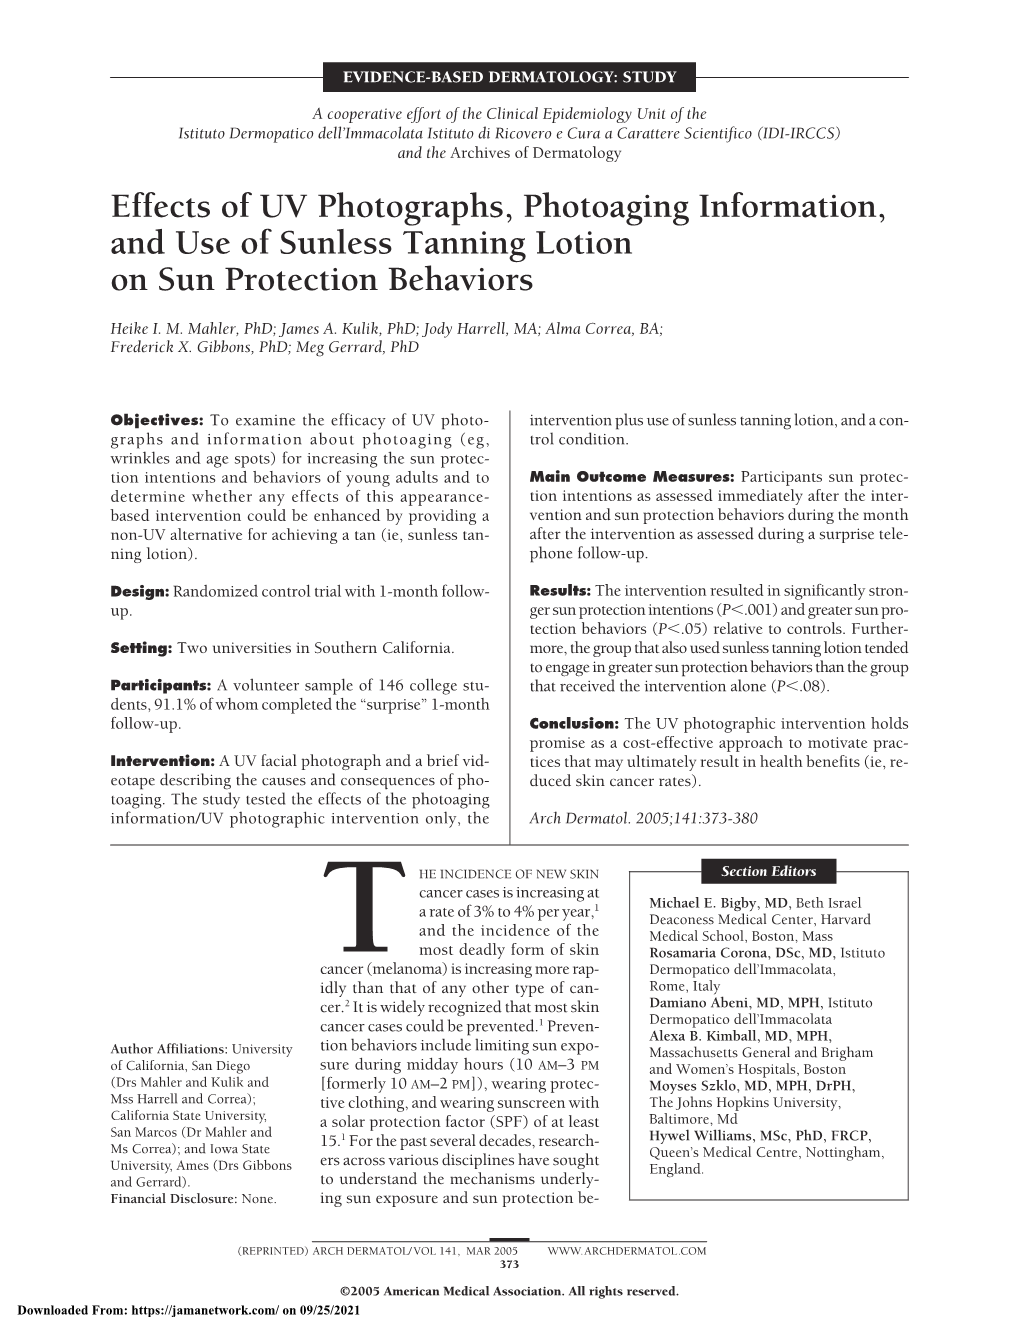 Effects of UV Photographs, Photoaging Information, and Use of Sunless Tanning Lotion on Sun Protection Behaviors